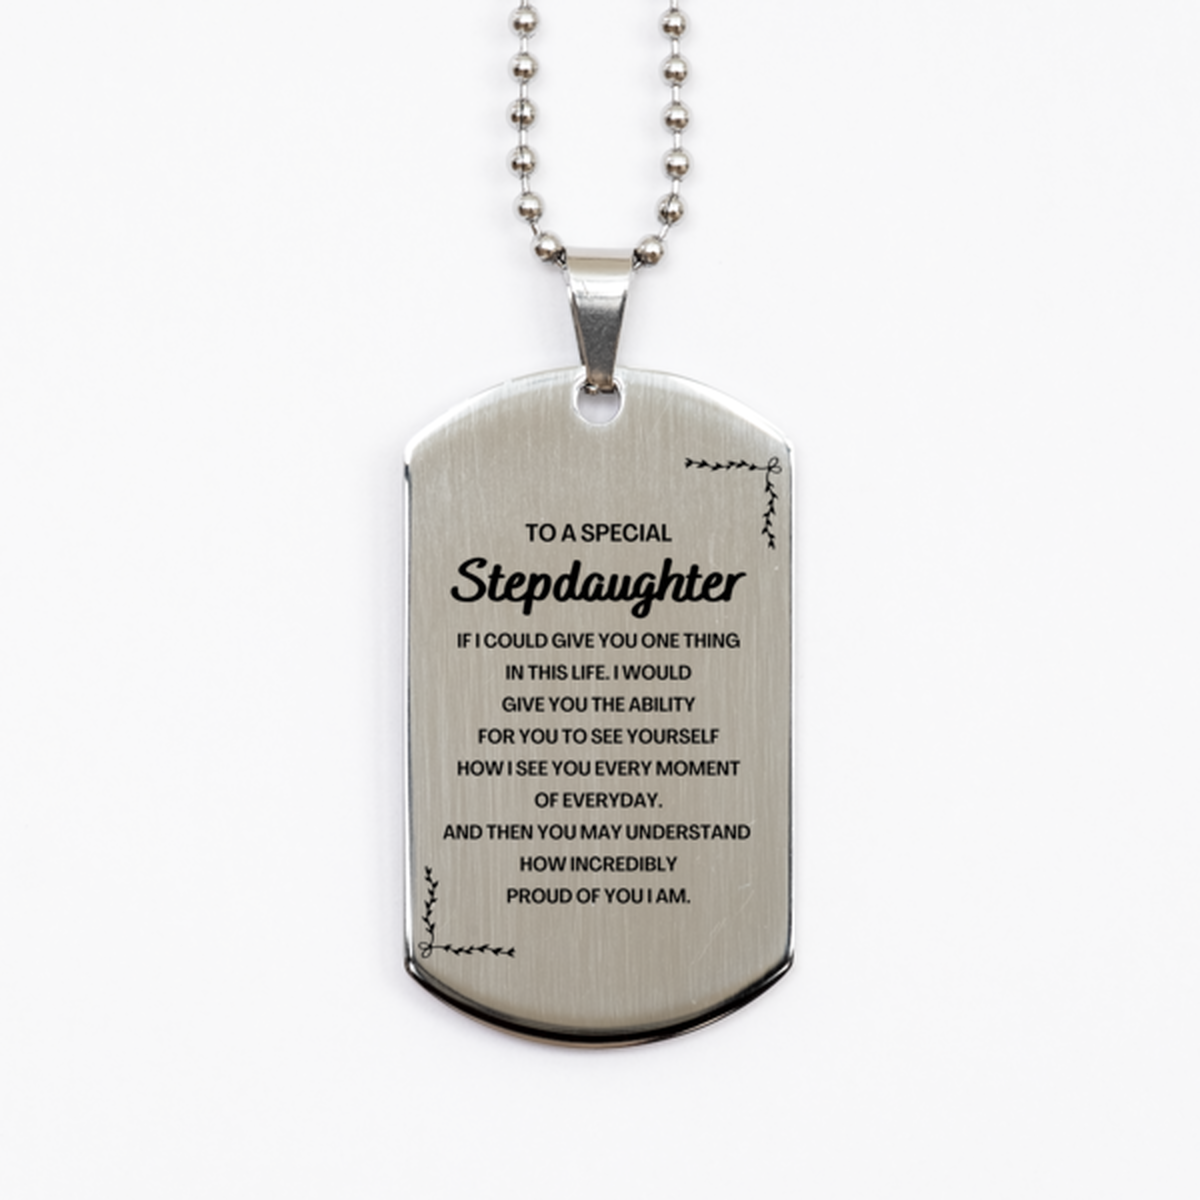 To My Stepdaughter Silver Dog Tag, Gifts For Stepdaughter Engraved, Inspirational Gifts for Christmas Birthday, Epic Gifts for Stepdaughter To A Special Stepdaughter how incredibly proud of you I am